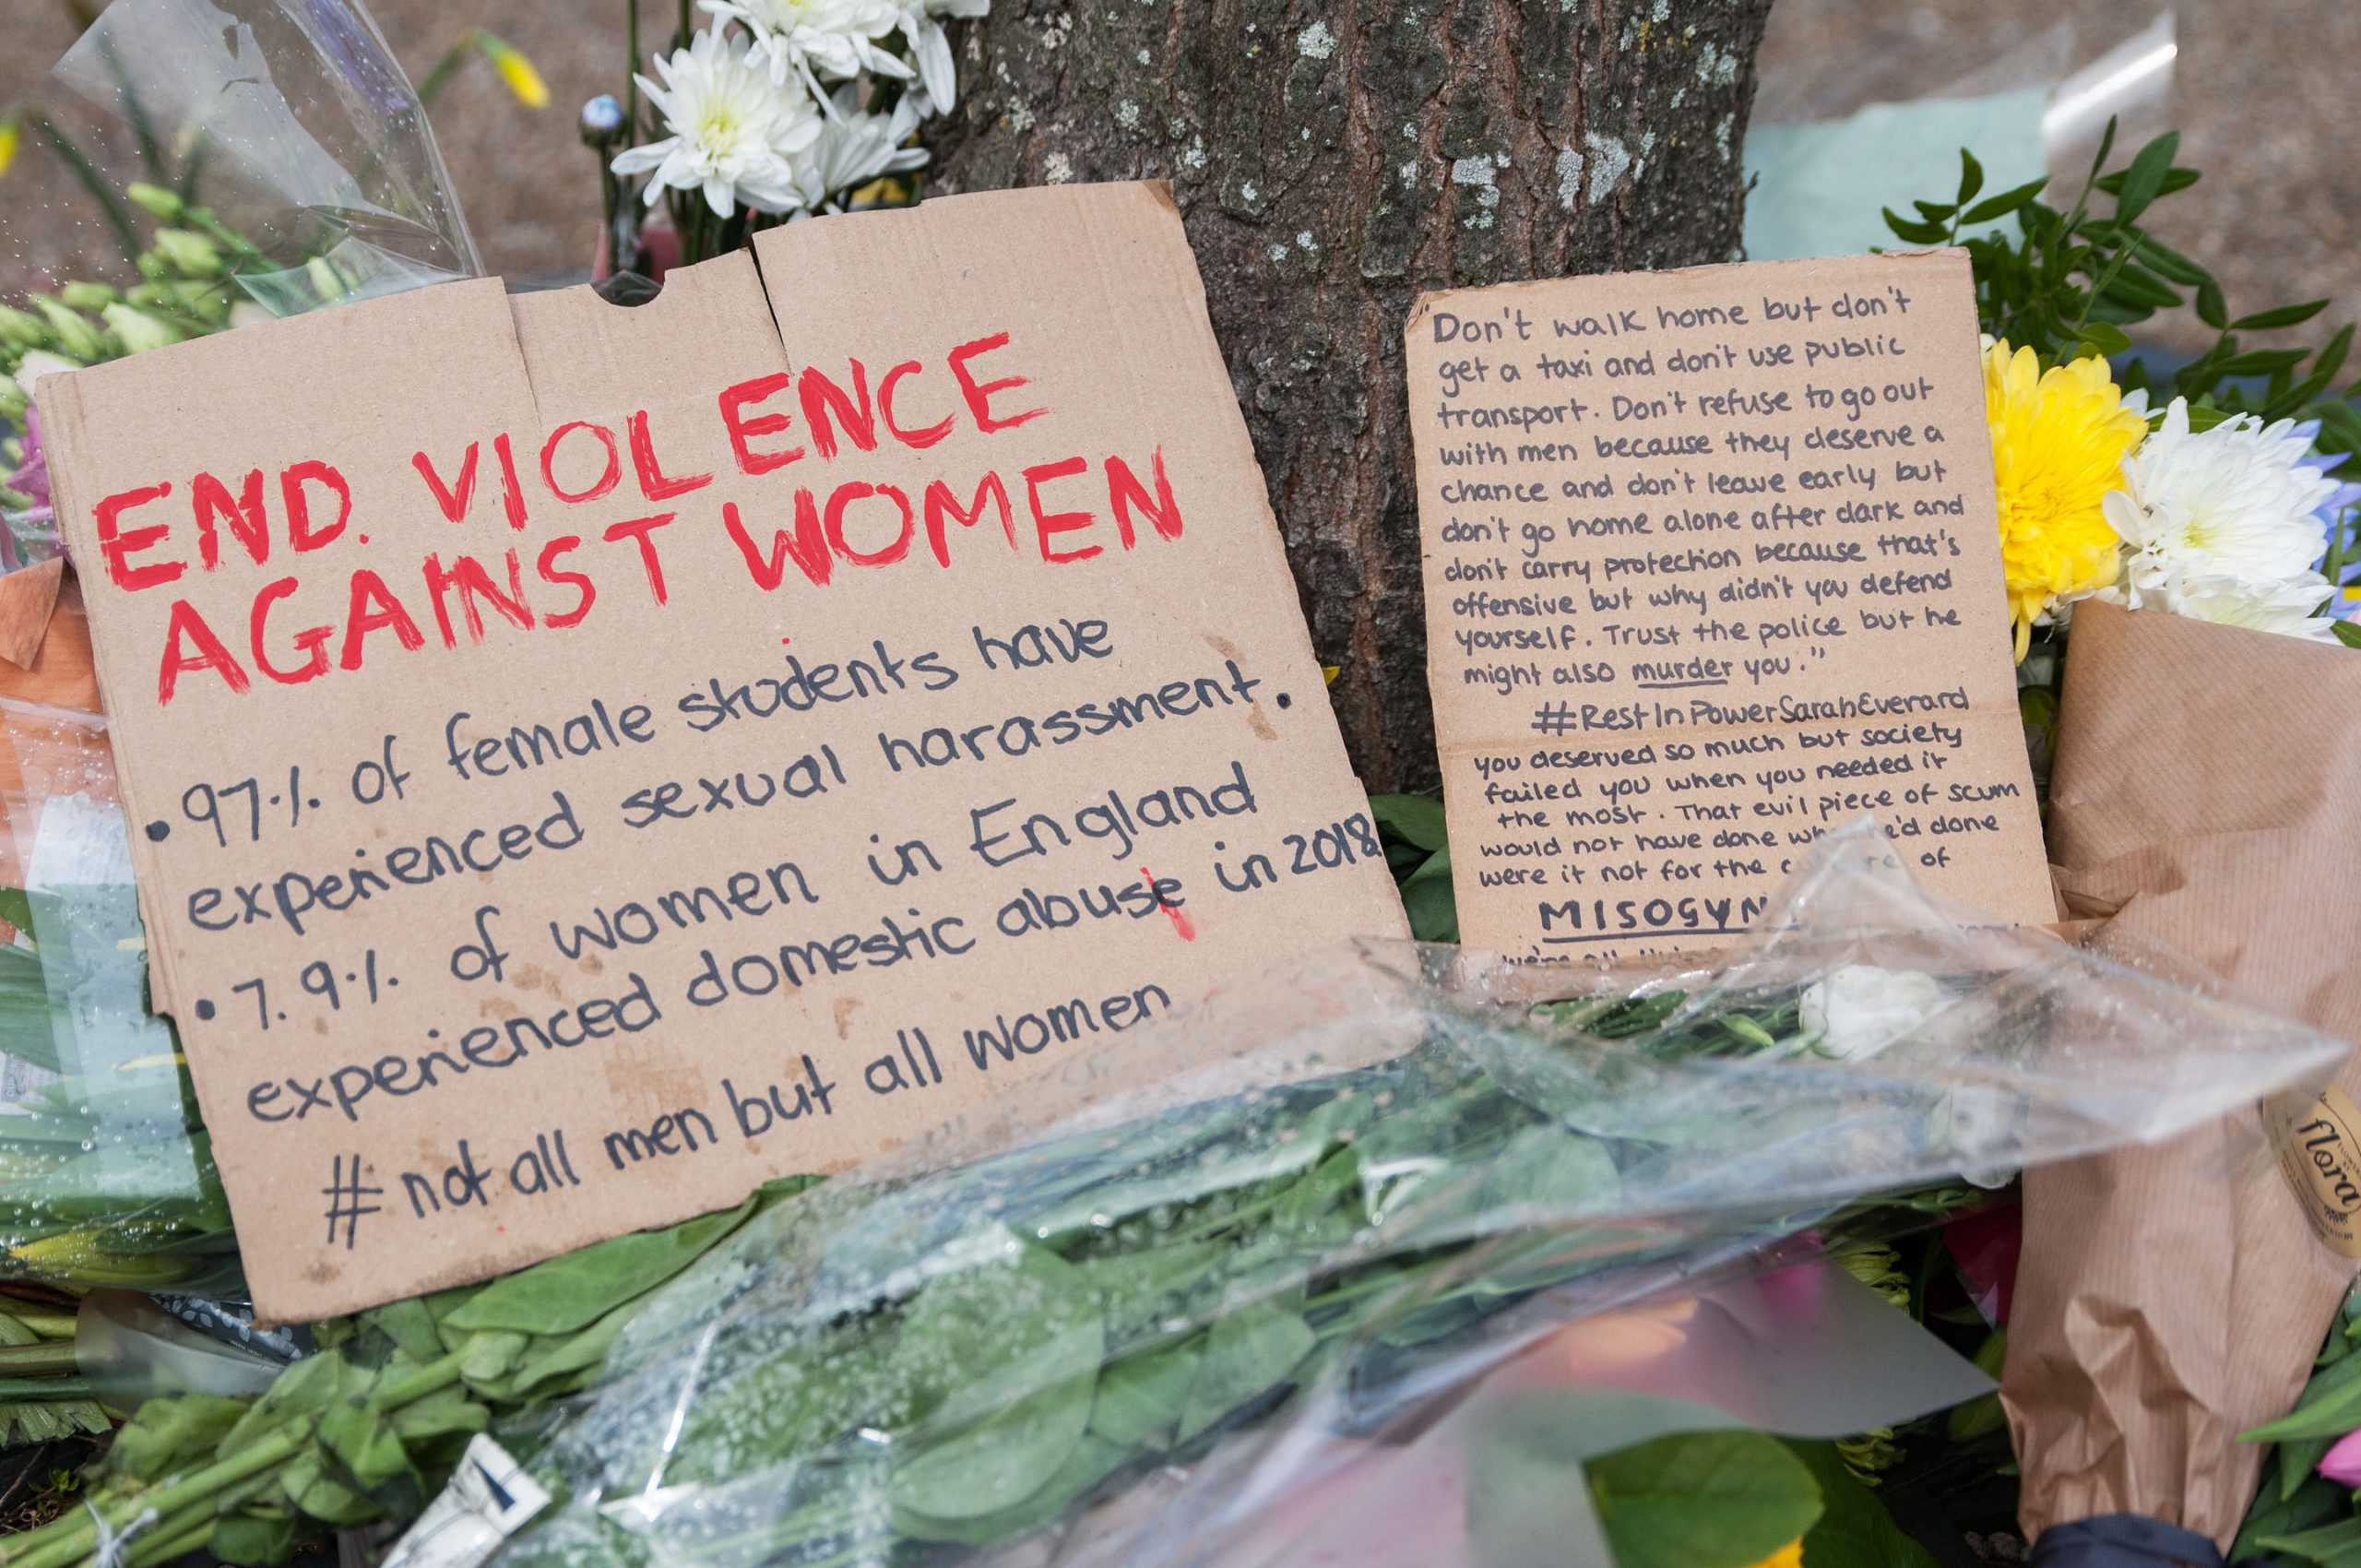 Flowers are laid to rest. A sign reads "End violence against women".